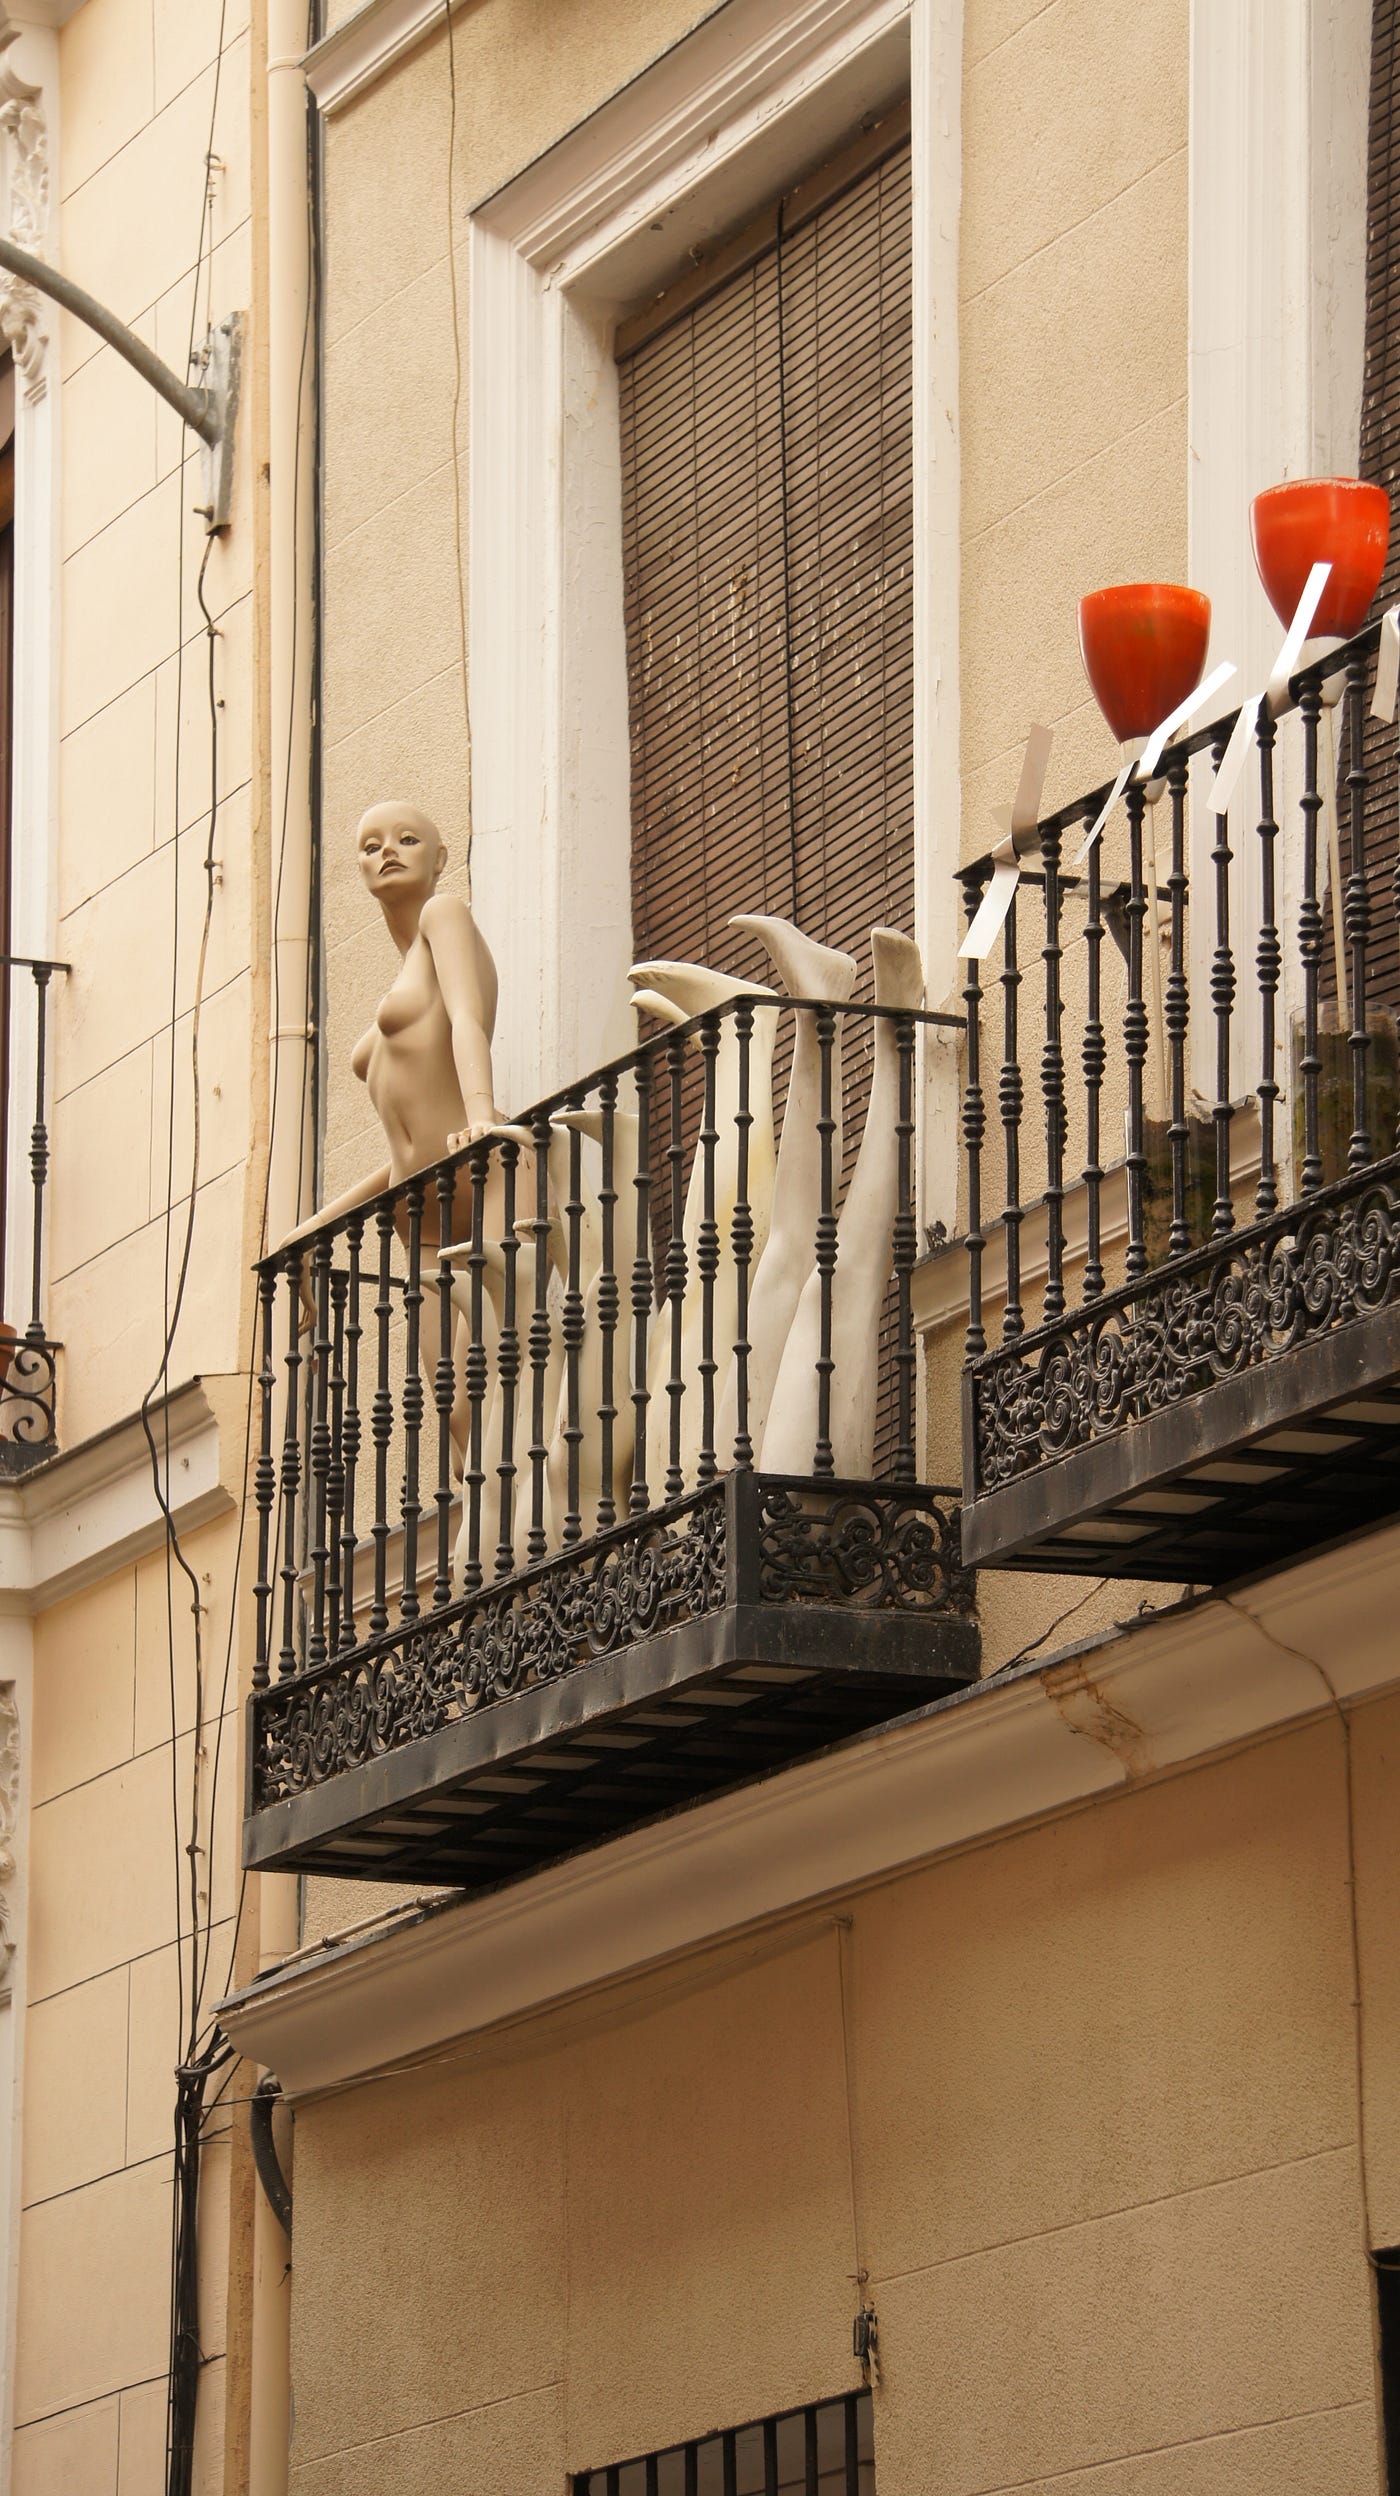 The Day I Saw A Naked Woman Openly Standing In A Window by KL Simmons Globetrotters Medium photo